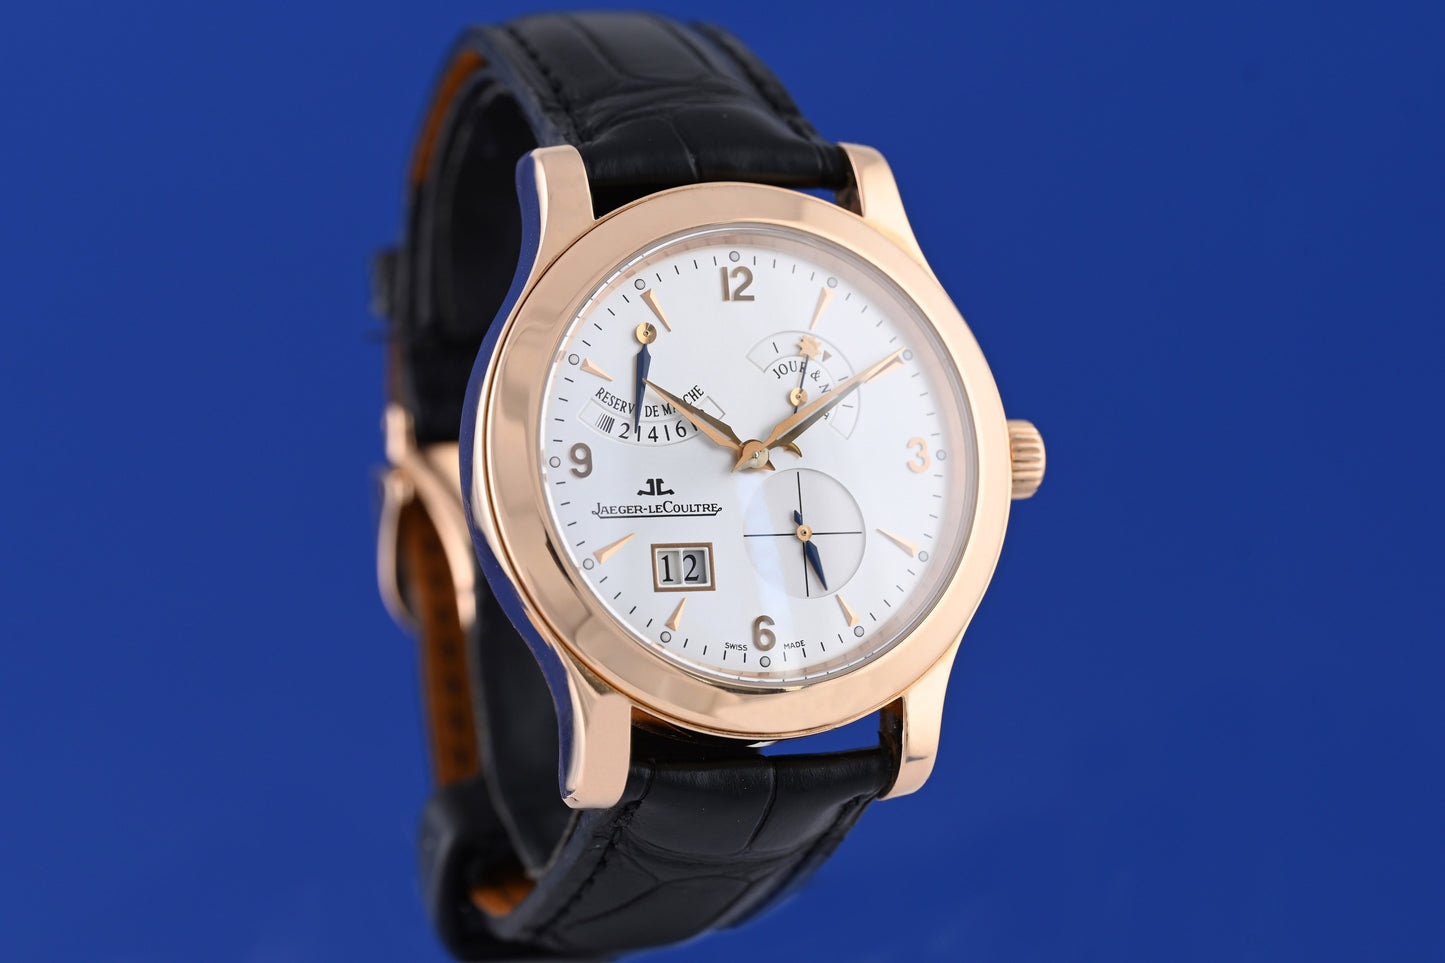 Jaeger-LeCoultre Master Control 8 Days Big Date 146.2.17 - rose gold